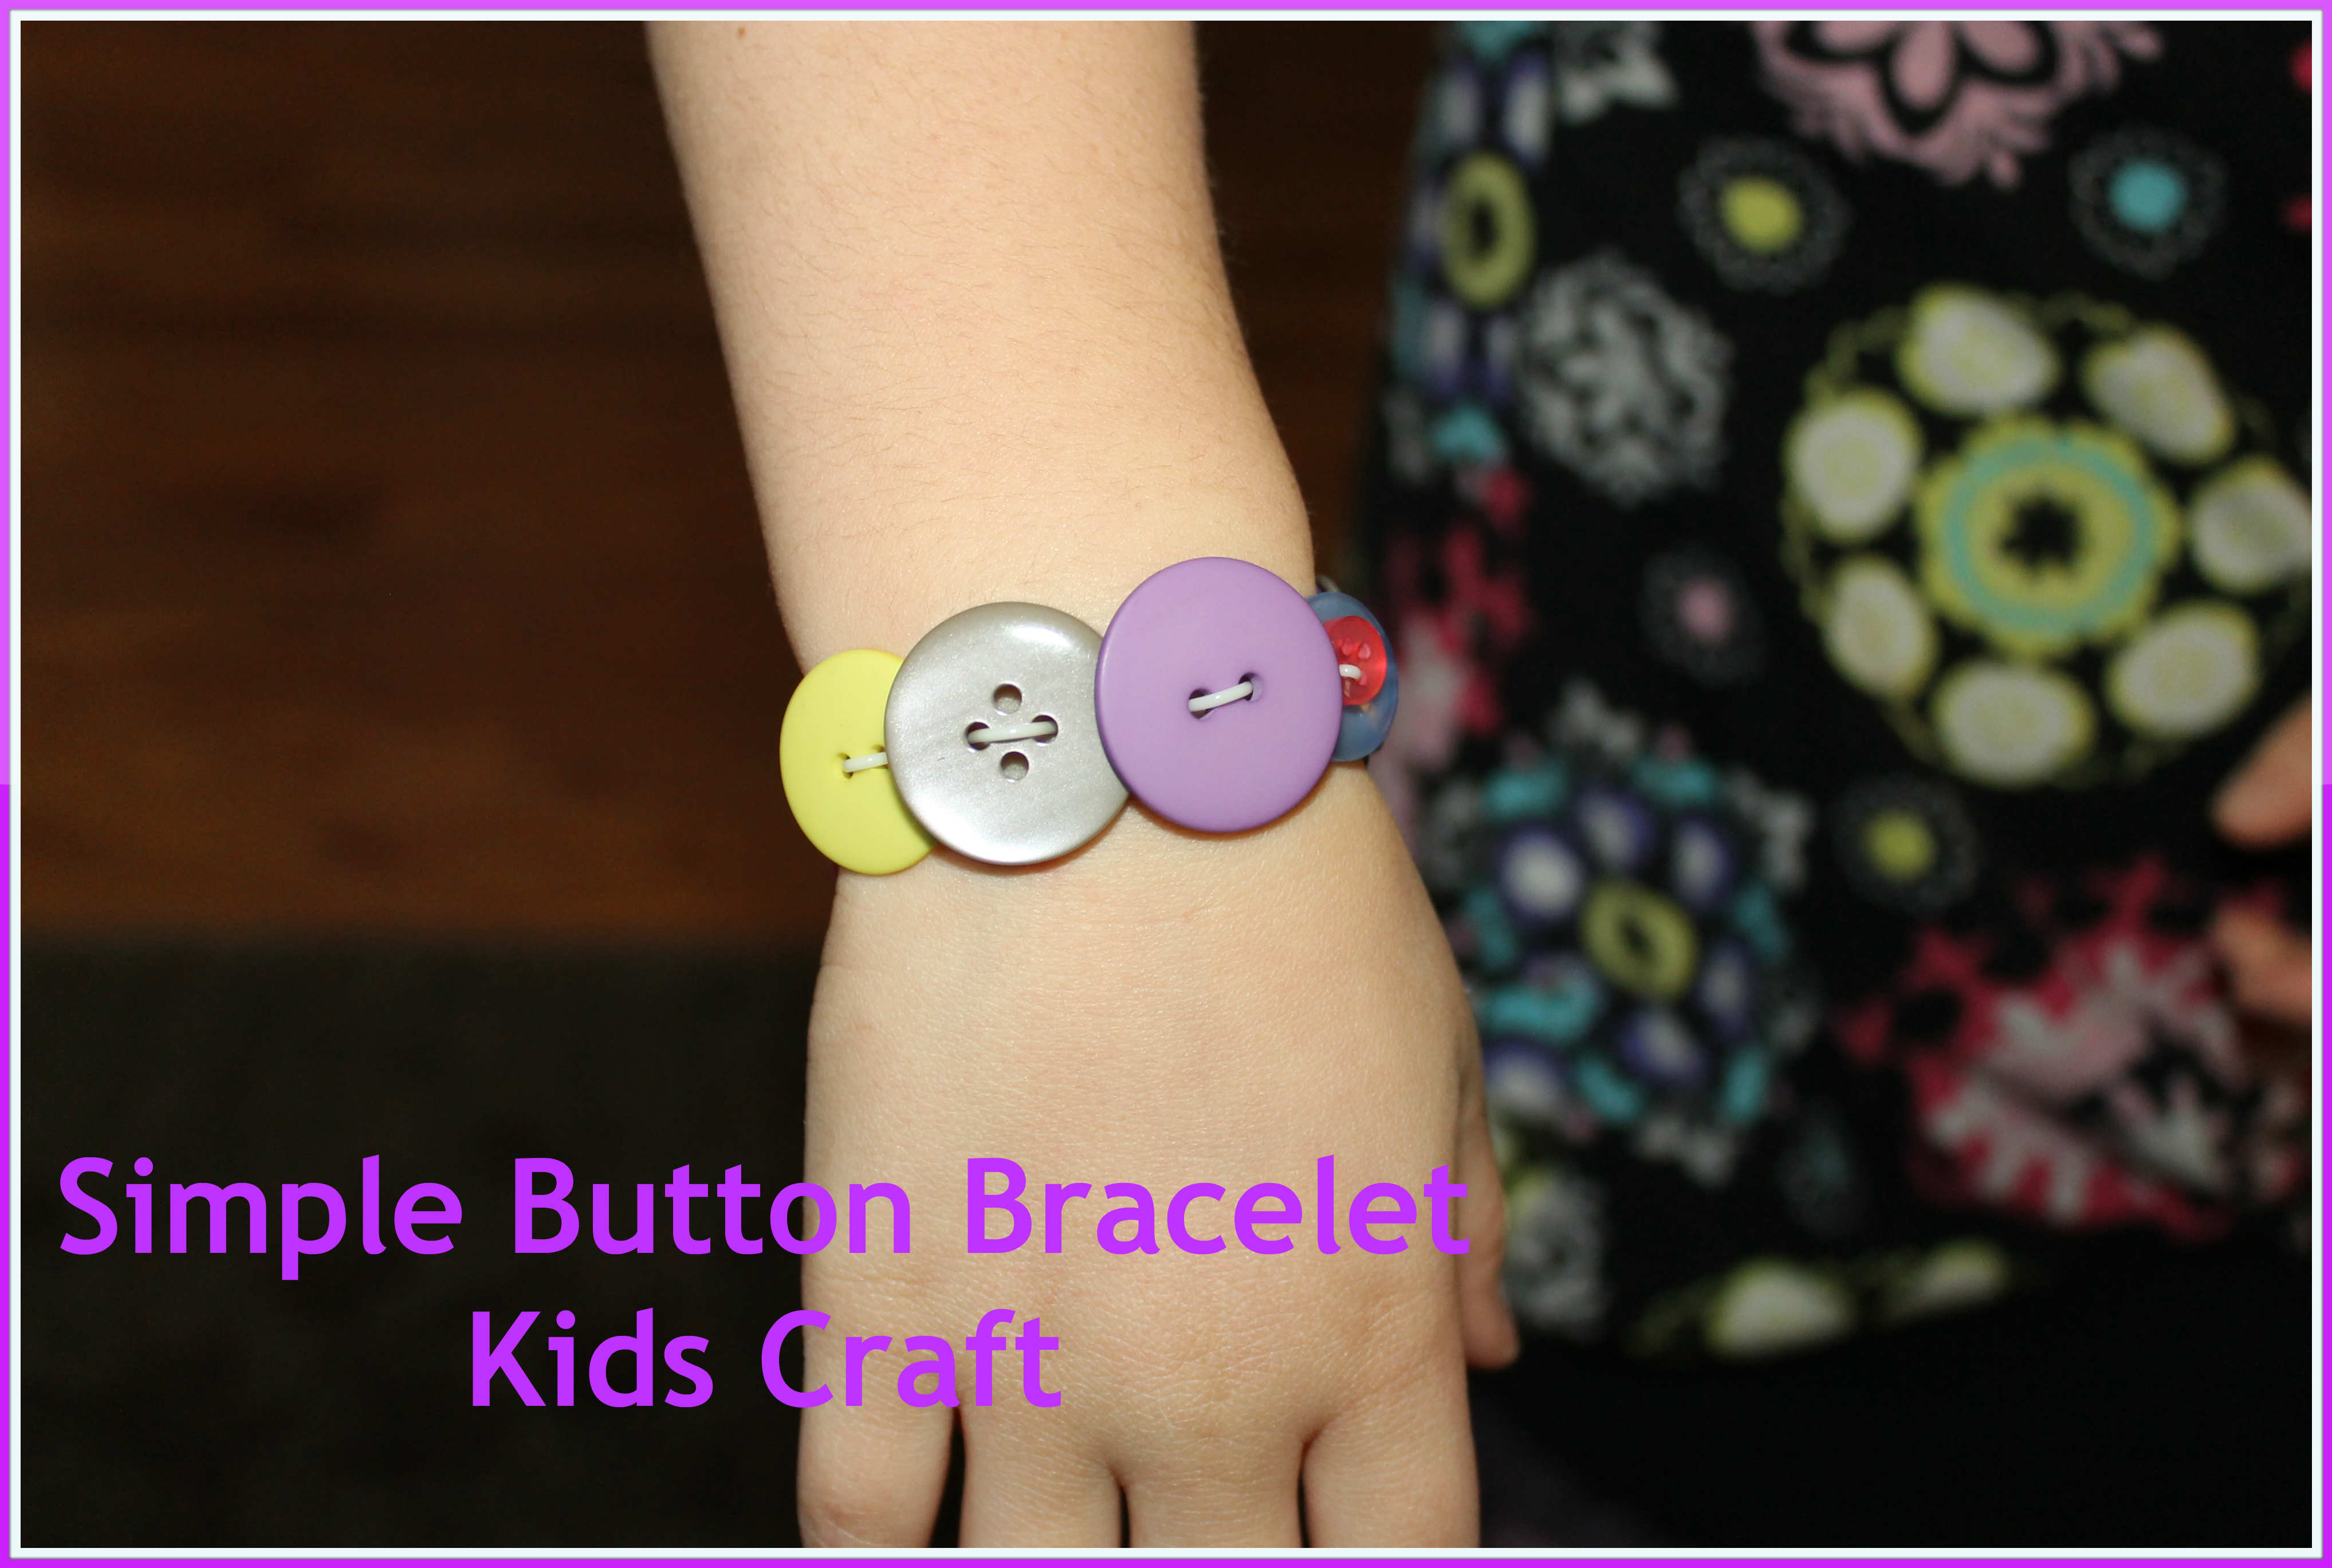 12 Bracelet Ideas to Make with Your Kids - Craft projects for every fan!